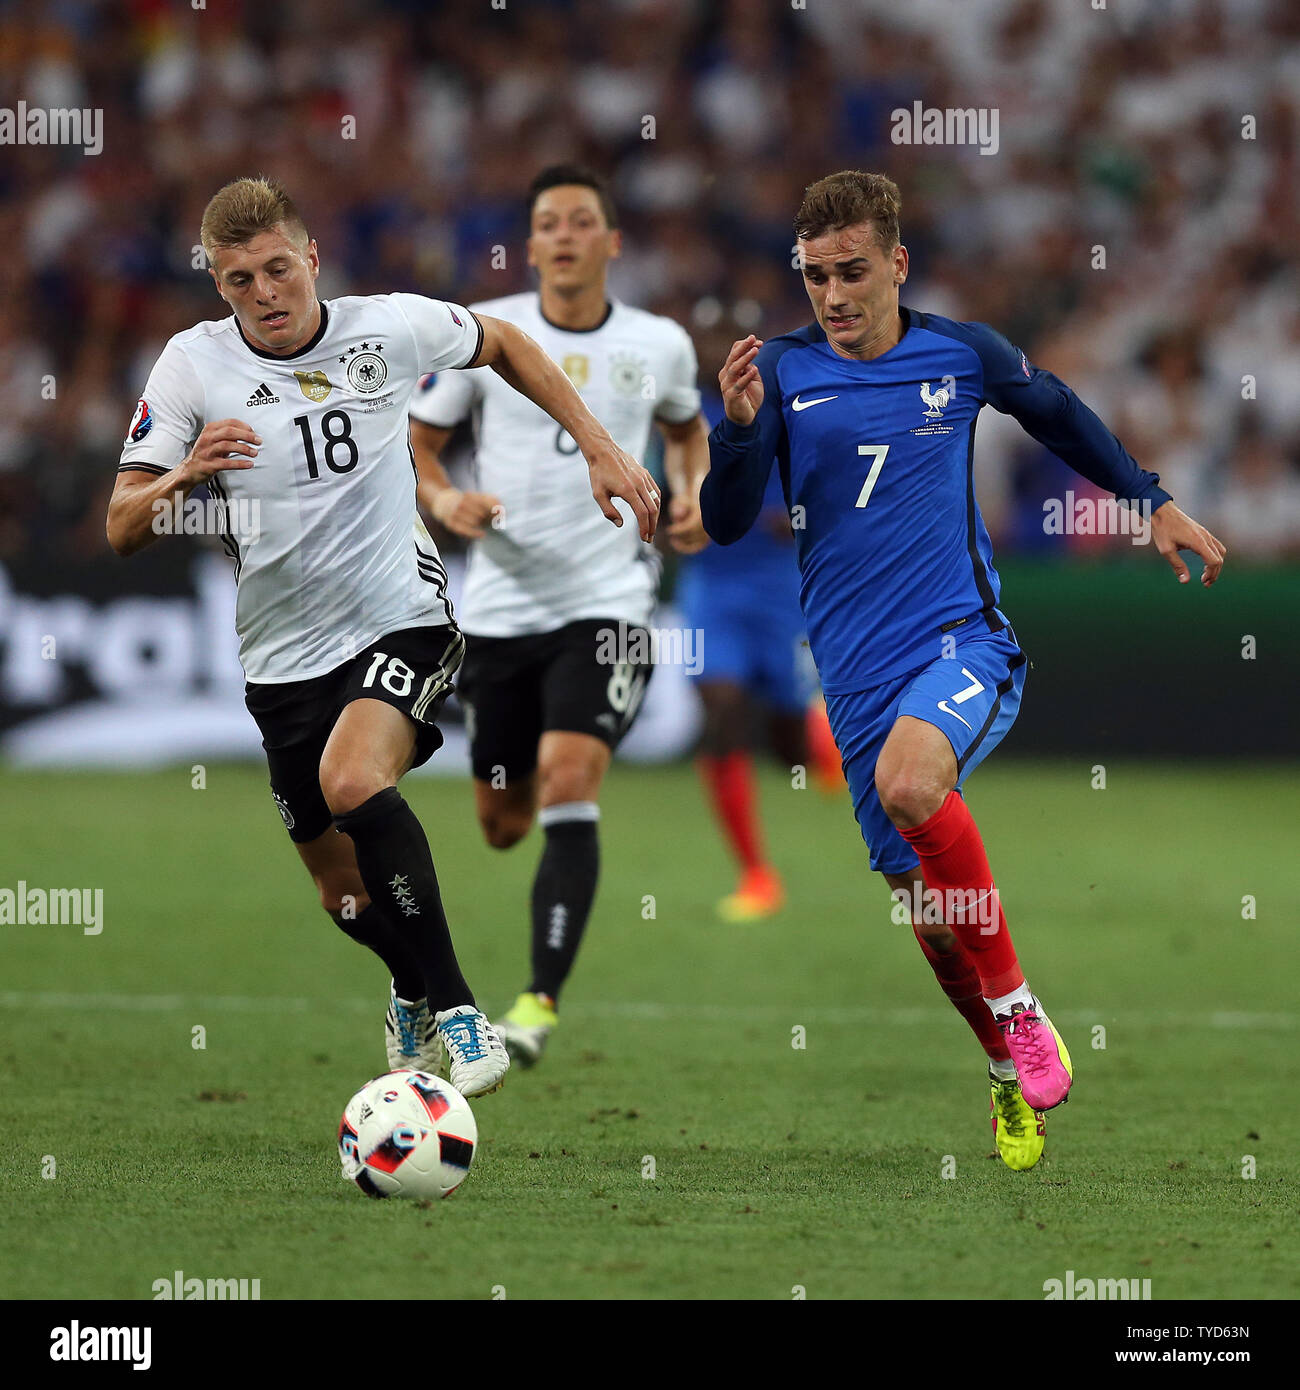 Toni Kroos (L) of Germany chases Antoine Griezmann of France during the  Euro 2016 Semi-Final match at the Stade Velodrome in Marseille, France on  July 7, 2016. France beat Germany 2-0 to